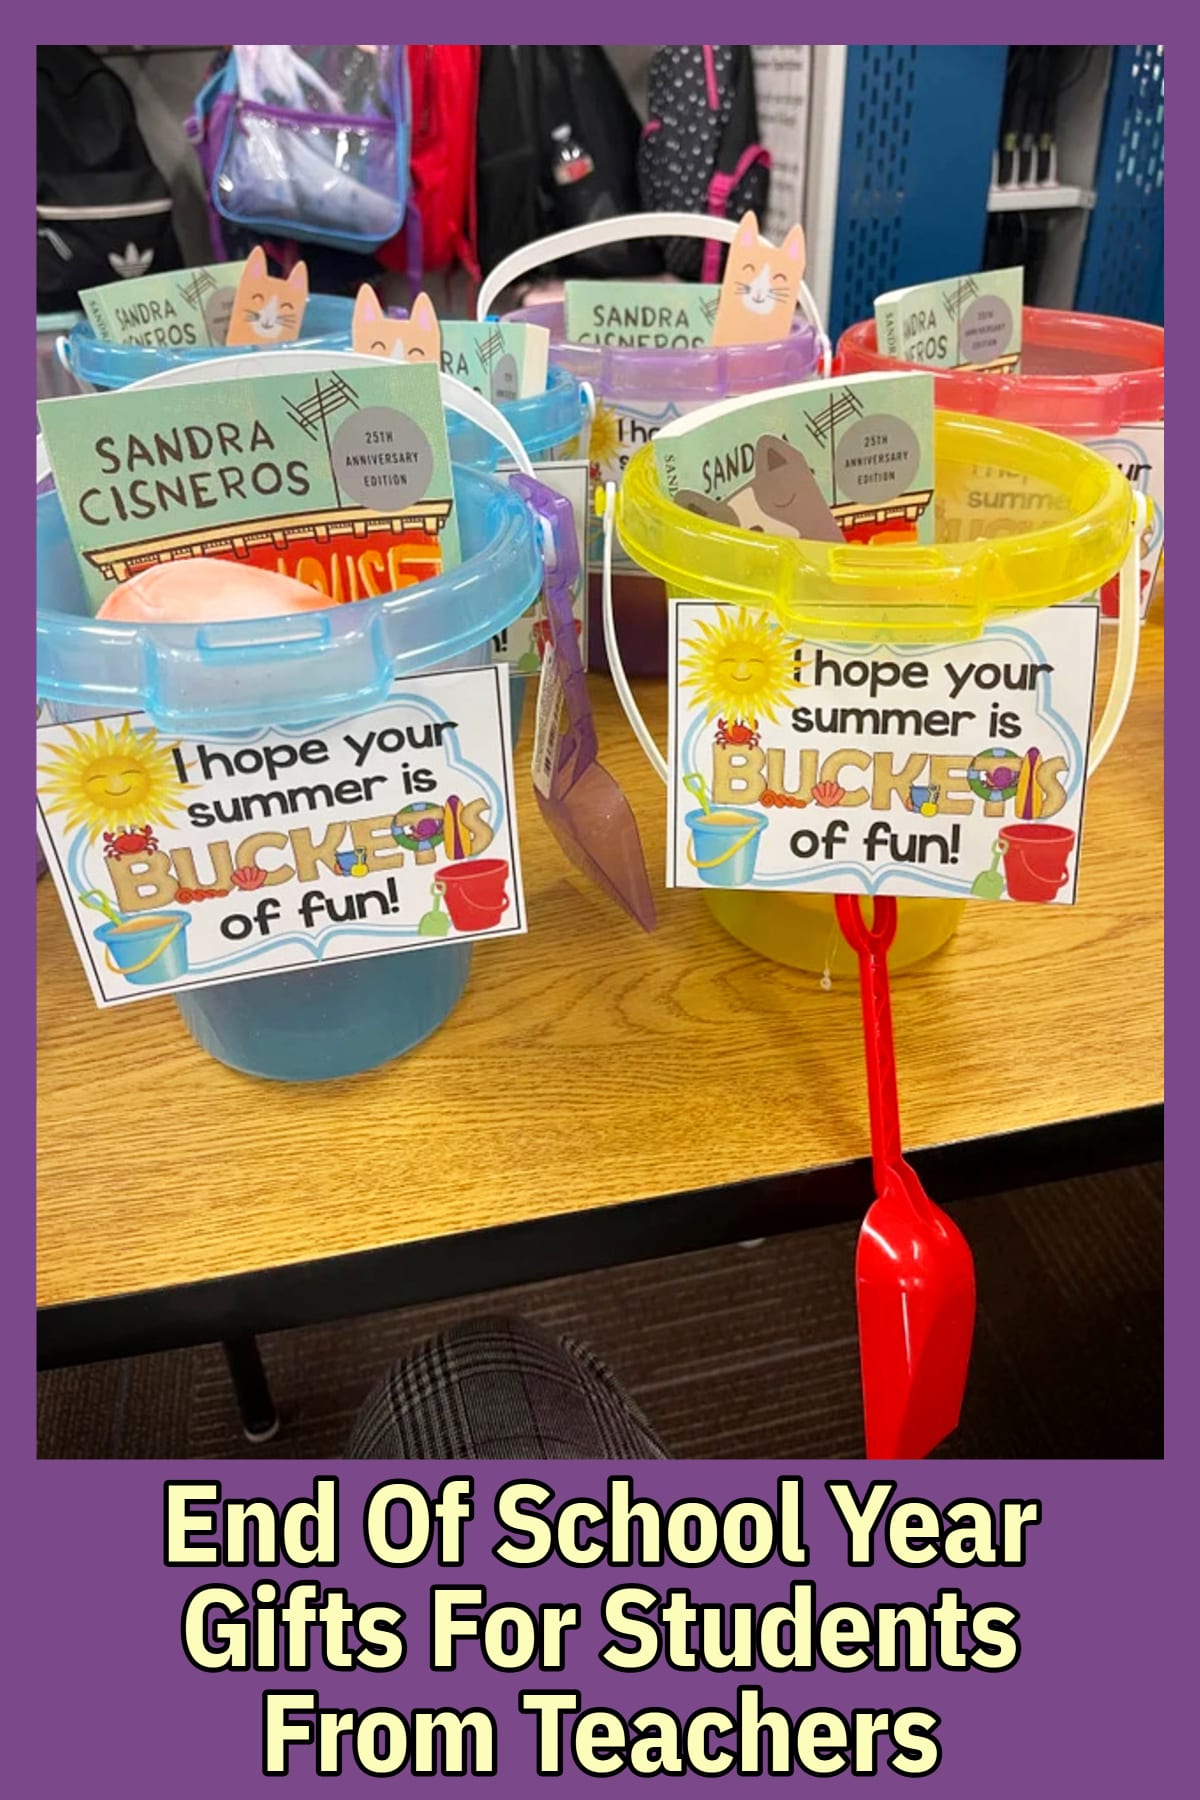 Handmade gift baskets for students from teachers - cute summer-themed end of the school year gift basket ideas made with cheap Dollar Tree store beach buckets